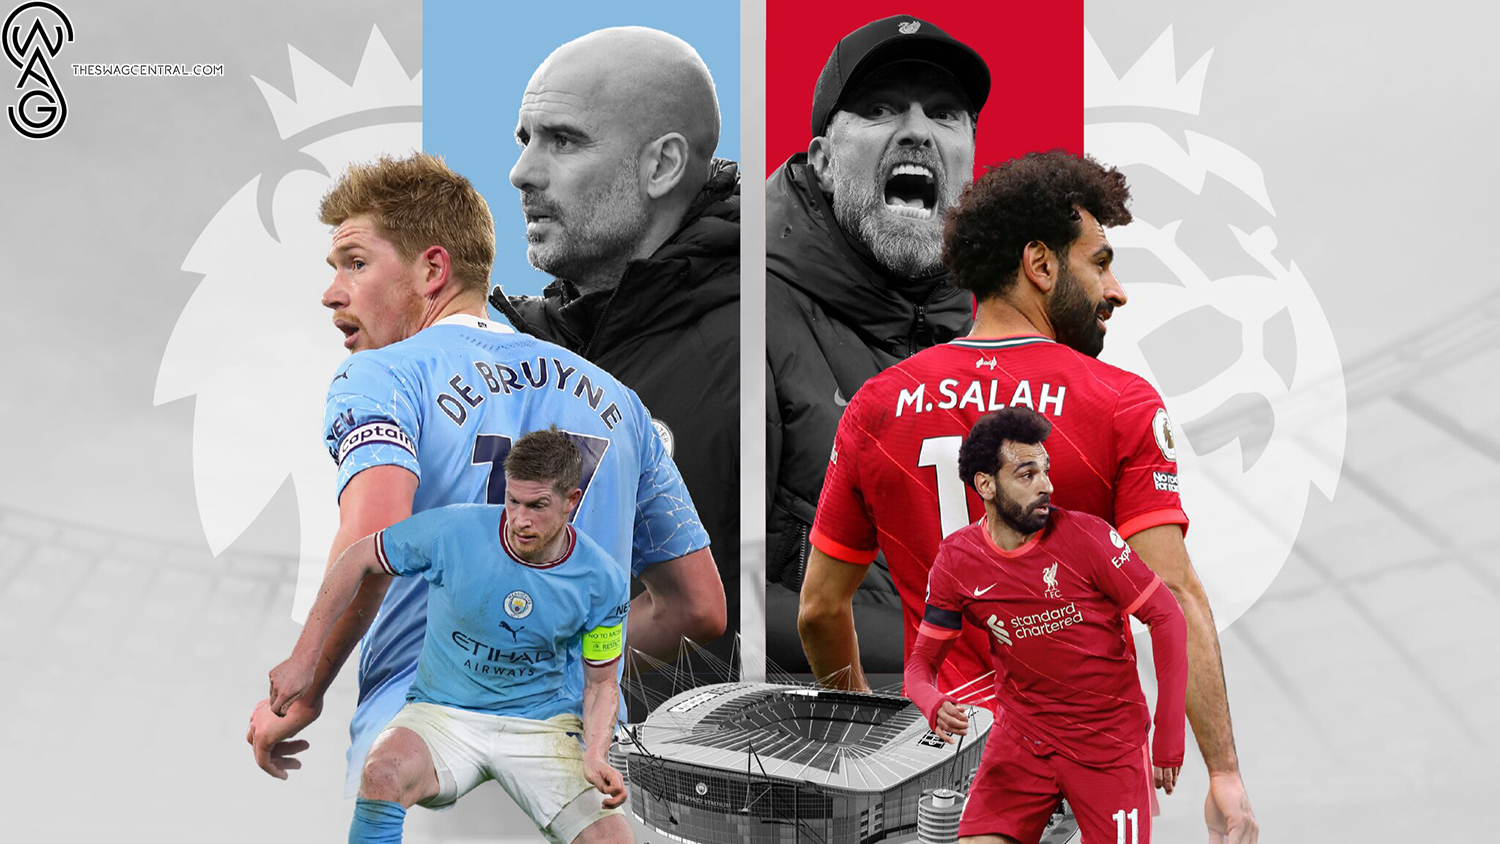 The Anfield Epic Liverpool vs. Man City's Battle for Supremacy